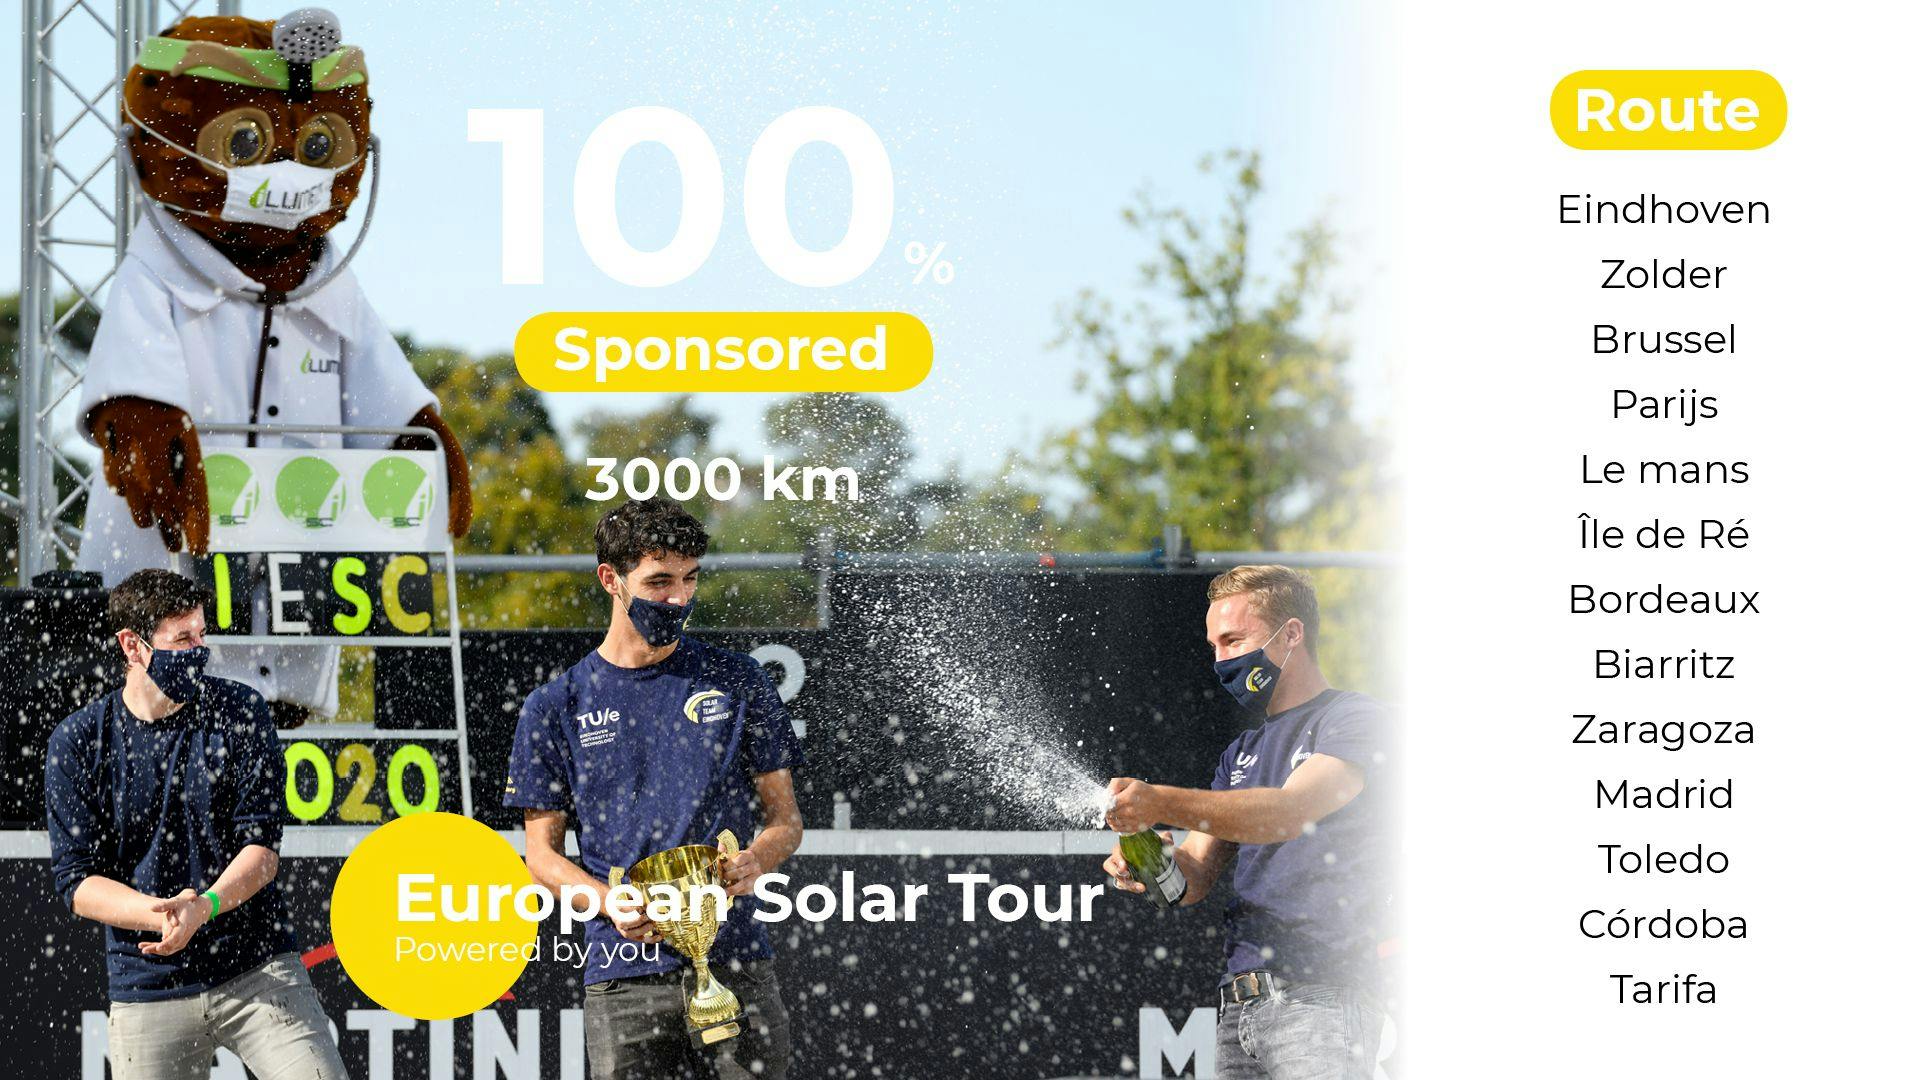  Solar Team Eindhoven goes to the most southern part of Europe, Tarifa
